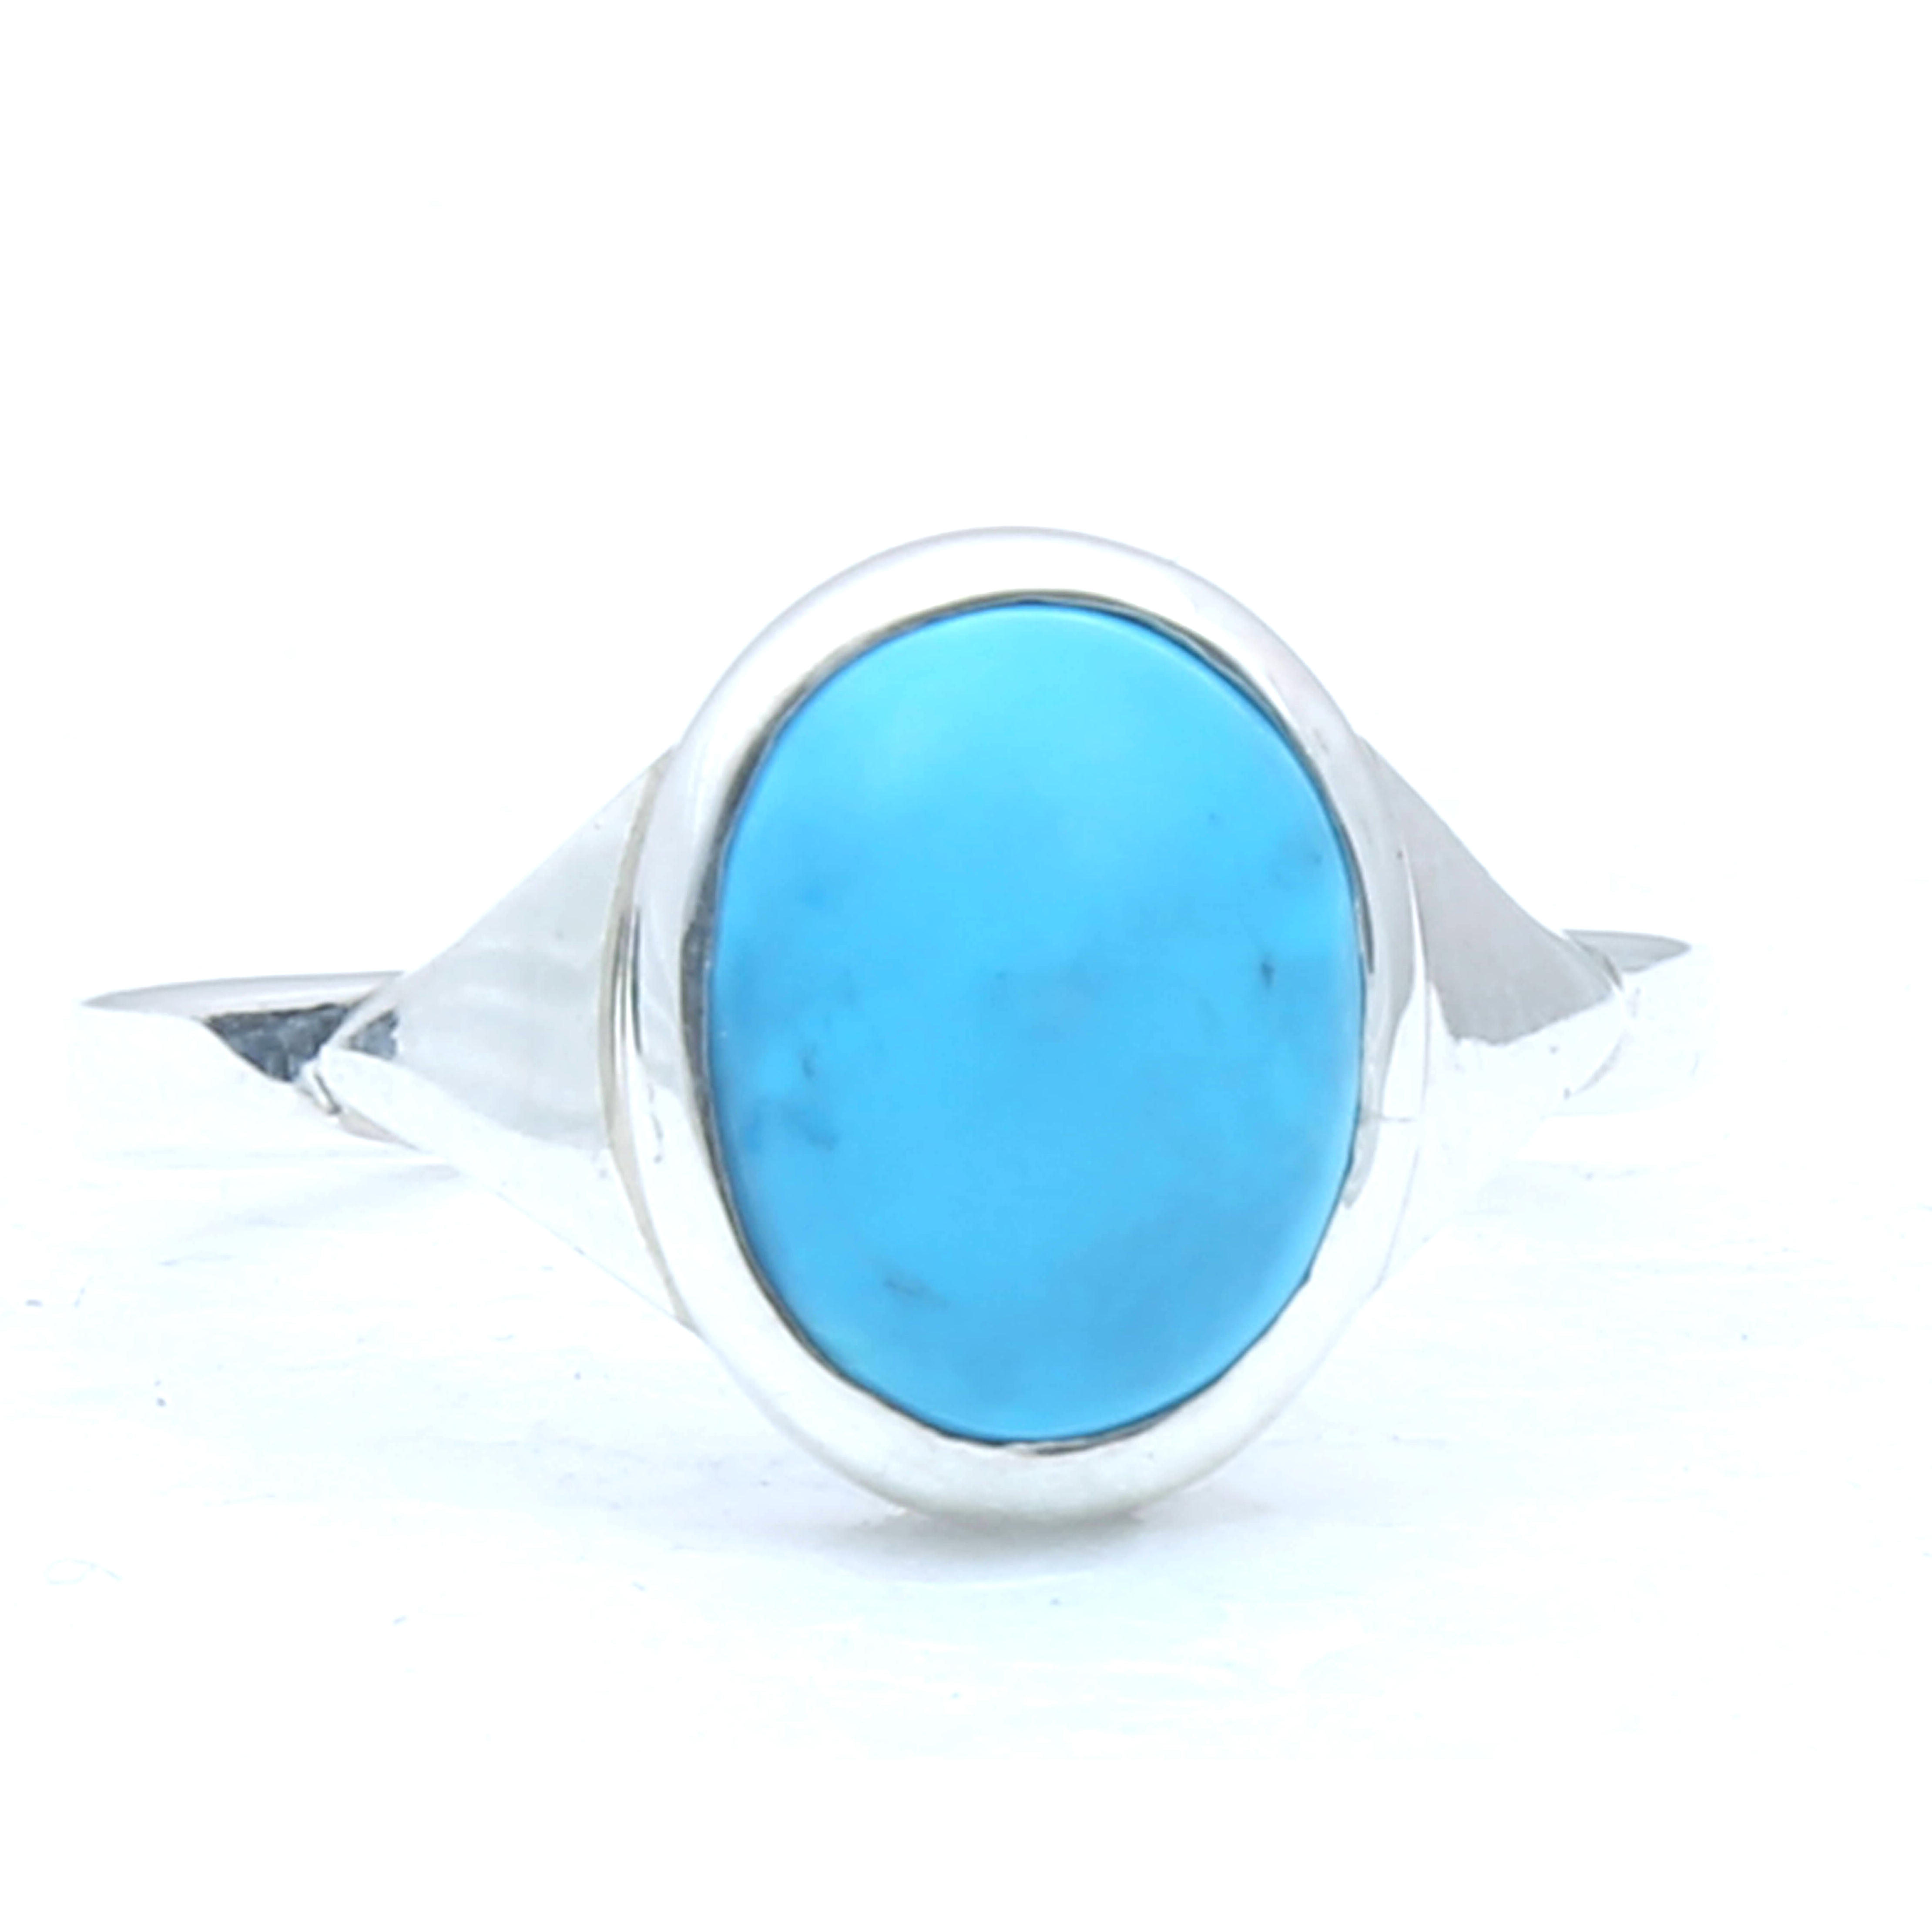 Buy Blue Turquoise Ring Gold, Cushion Ring, Turquoise Gemstone Ring,  Solitaire Ring, 925 Silver Rings, Gold Plated Ring, Gift for Her Online in  India - Etsy | Turquoise ring silver, Boho rings